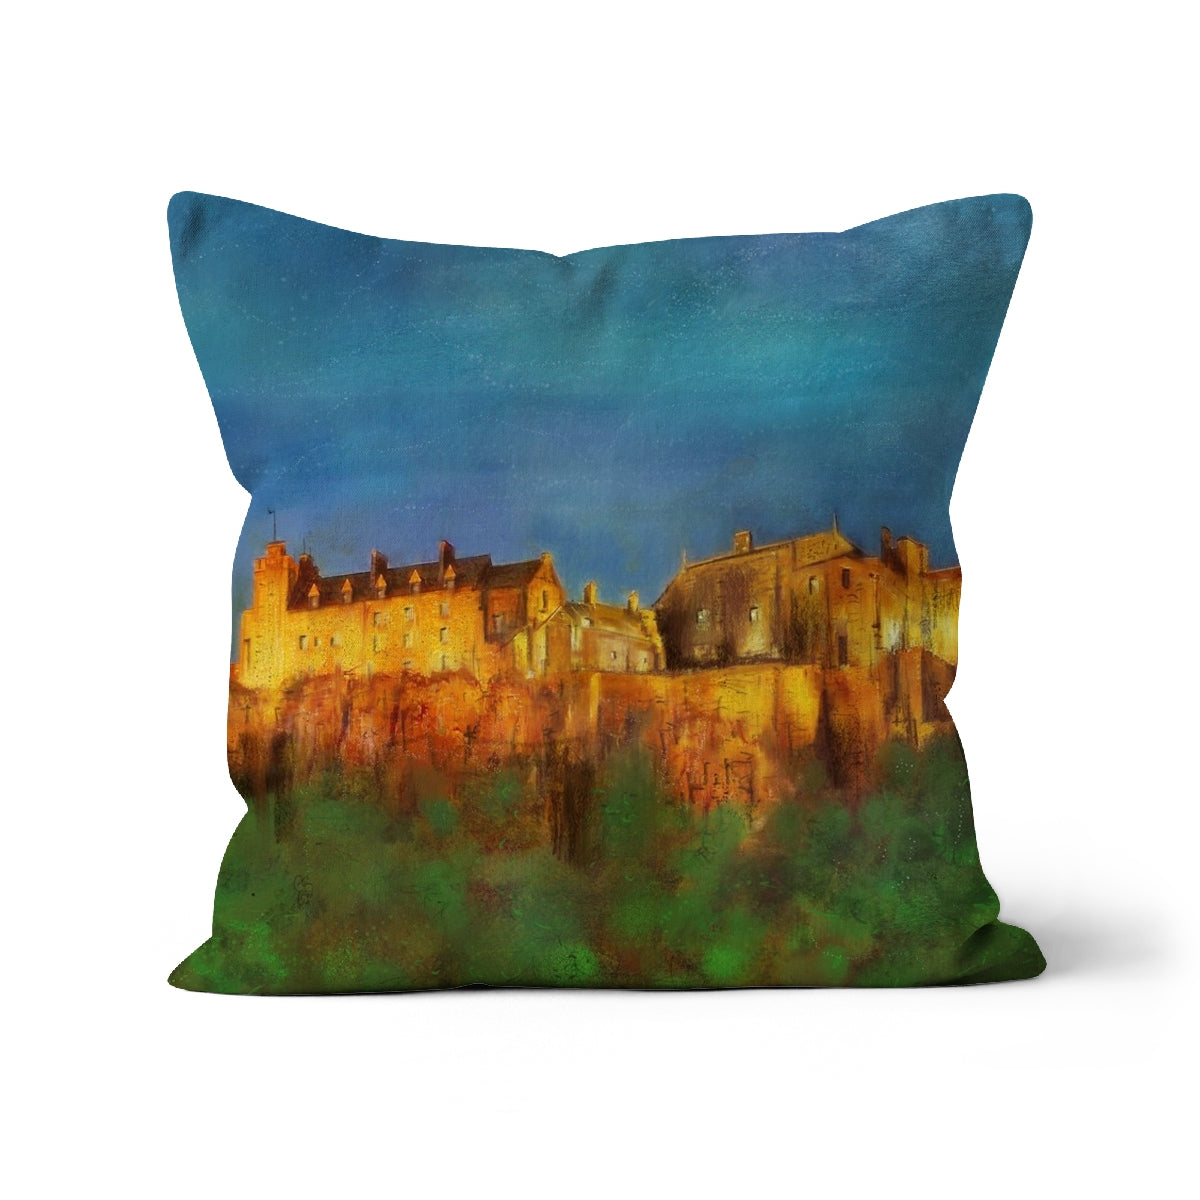 Stirling Castle Art Gifts Cushion-Cushions-Historic & Iconic Scotland Art Gallery-Canvas-24"x24"-Paintings, Prints, Homeware, Art Gifts From Scotland By Scottish Artist Kevin Hunter